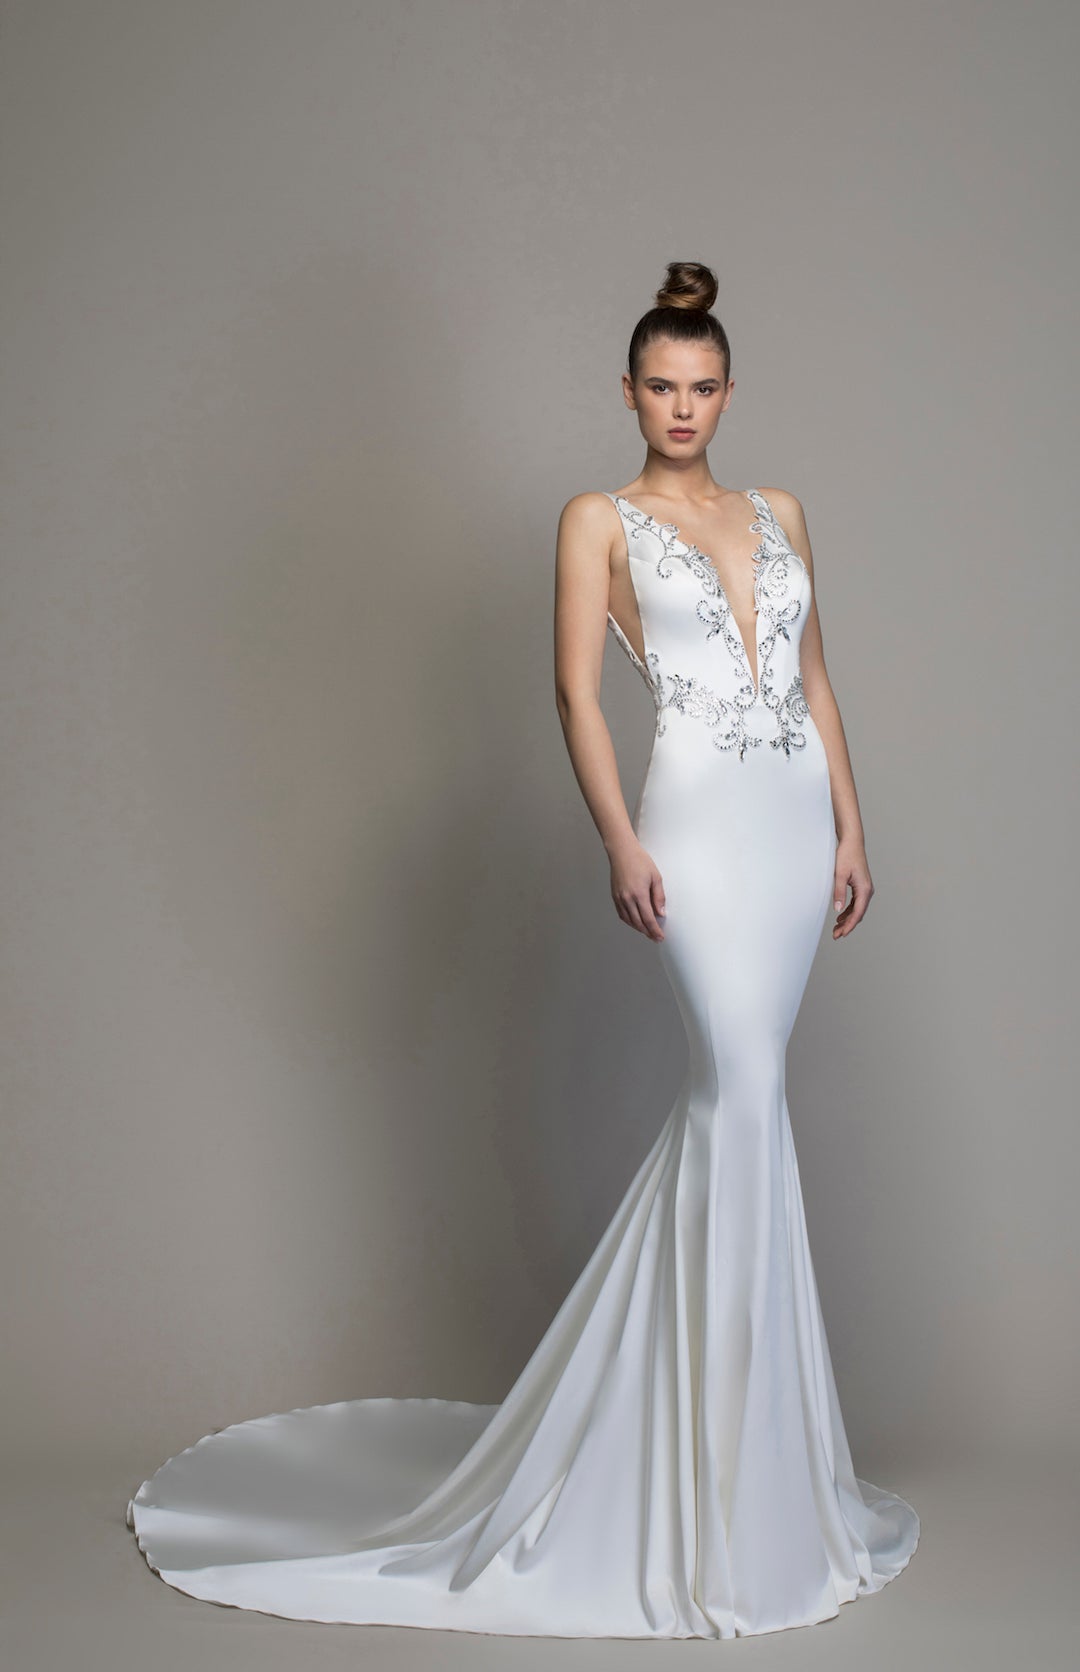 Pnina Tornai's new LOVE 2020 Collection is out! This is style 14773